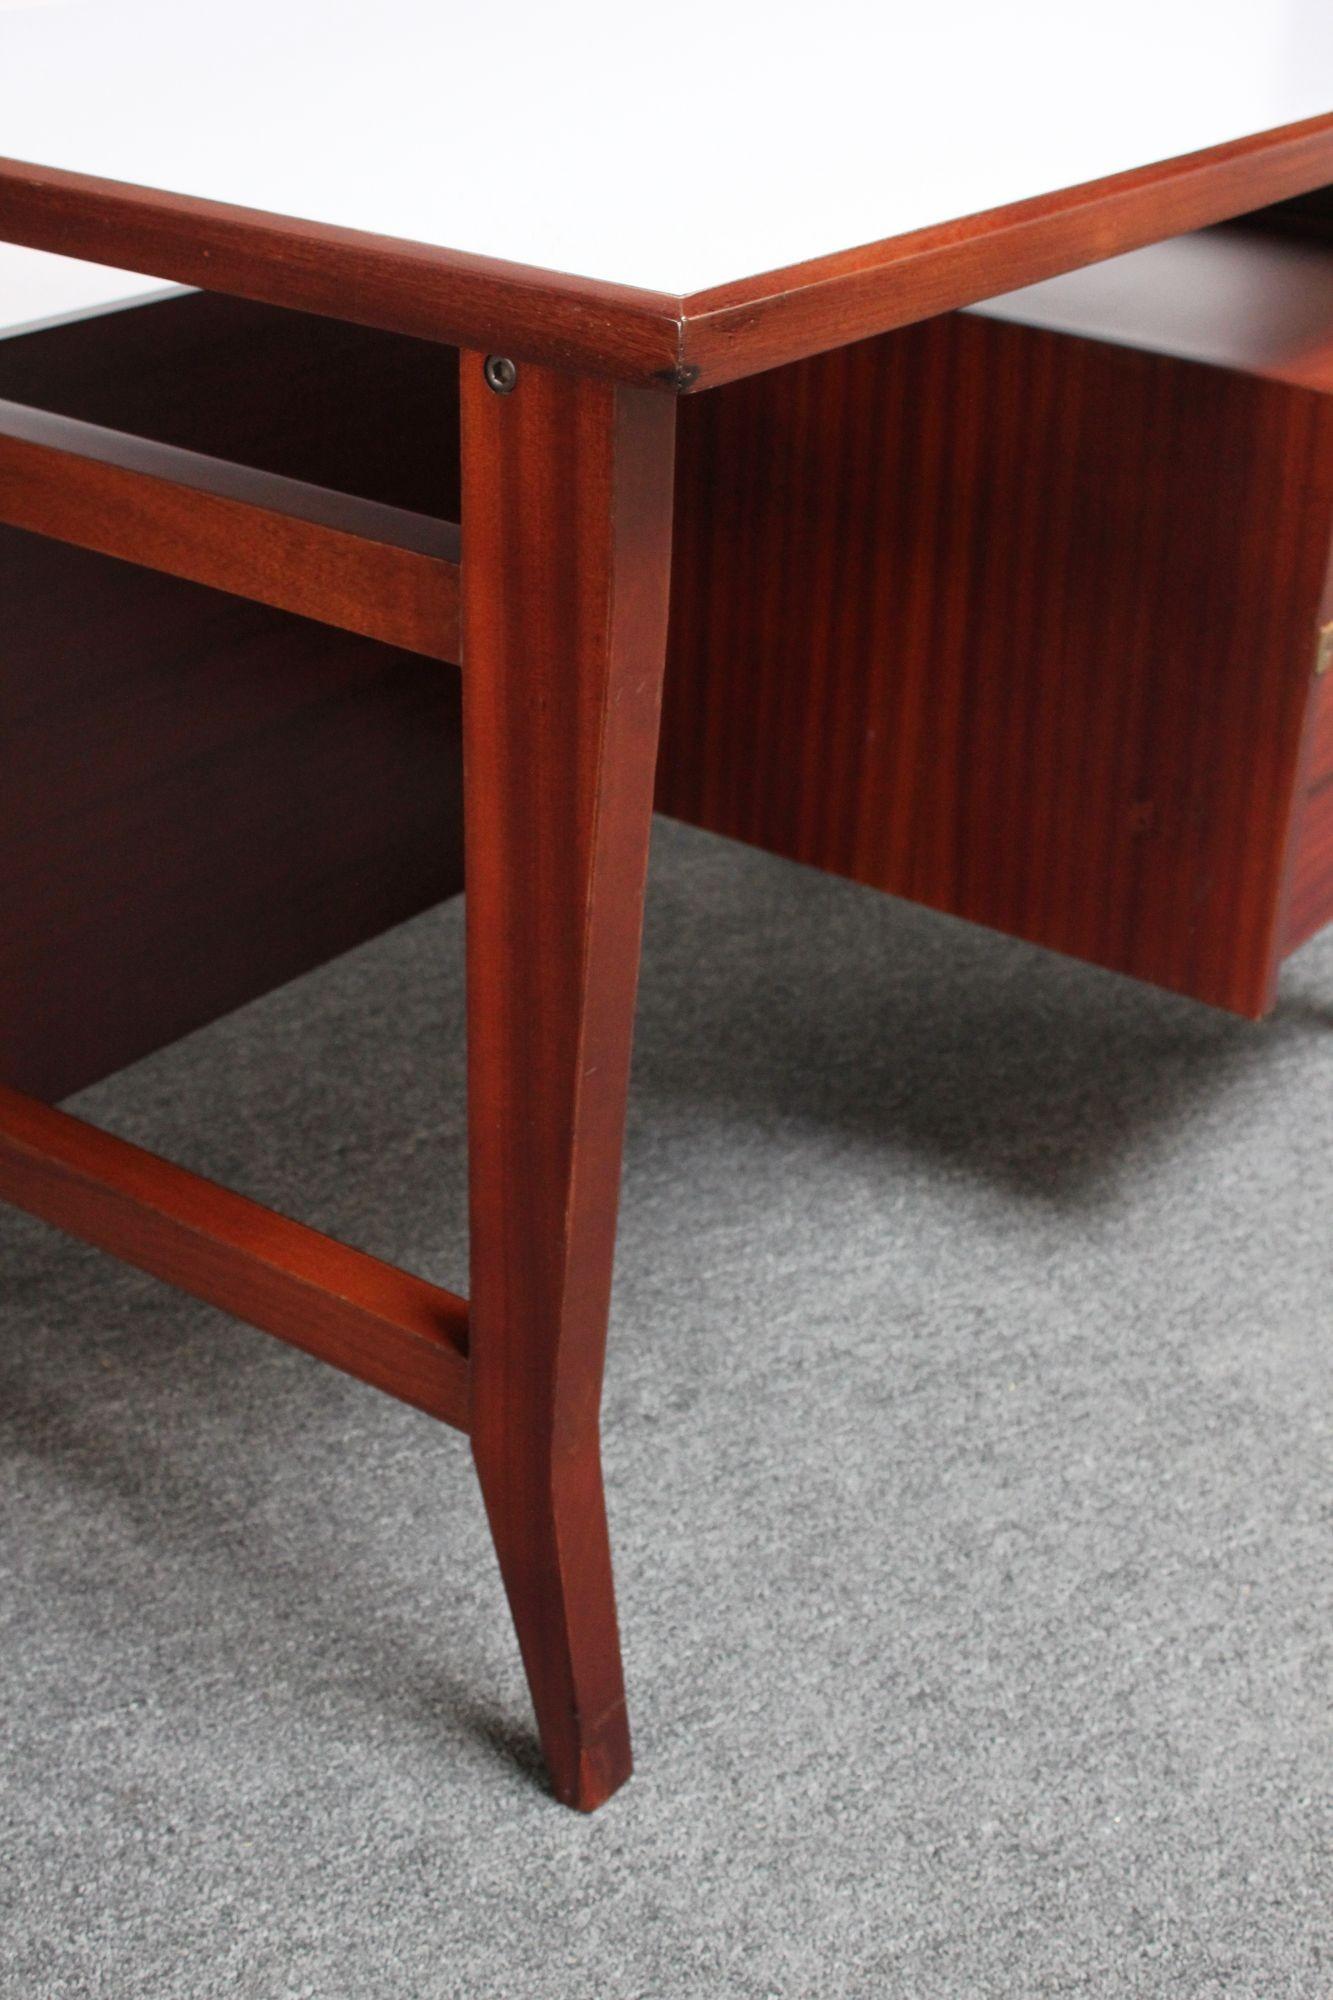 Petite Italian Modern Stained Mahogany Writing Desk by Gio Ponti for Schirolli For Sale 2